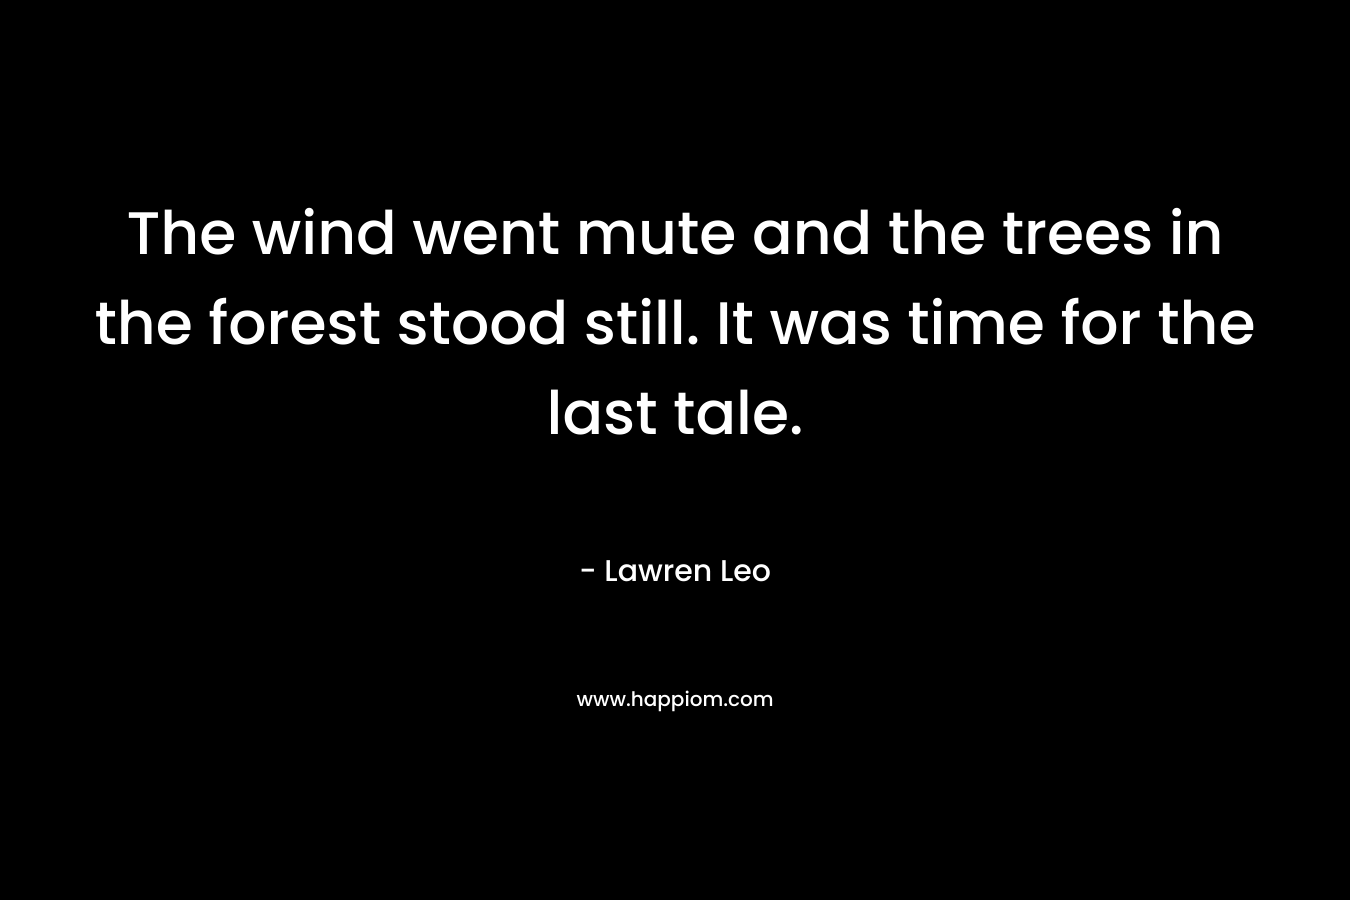 The wind went mute and the trees in the forest stood still. It was time for the last tale. – Lawren Leo